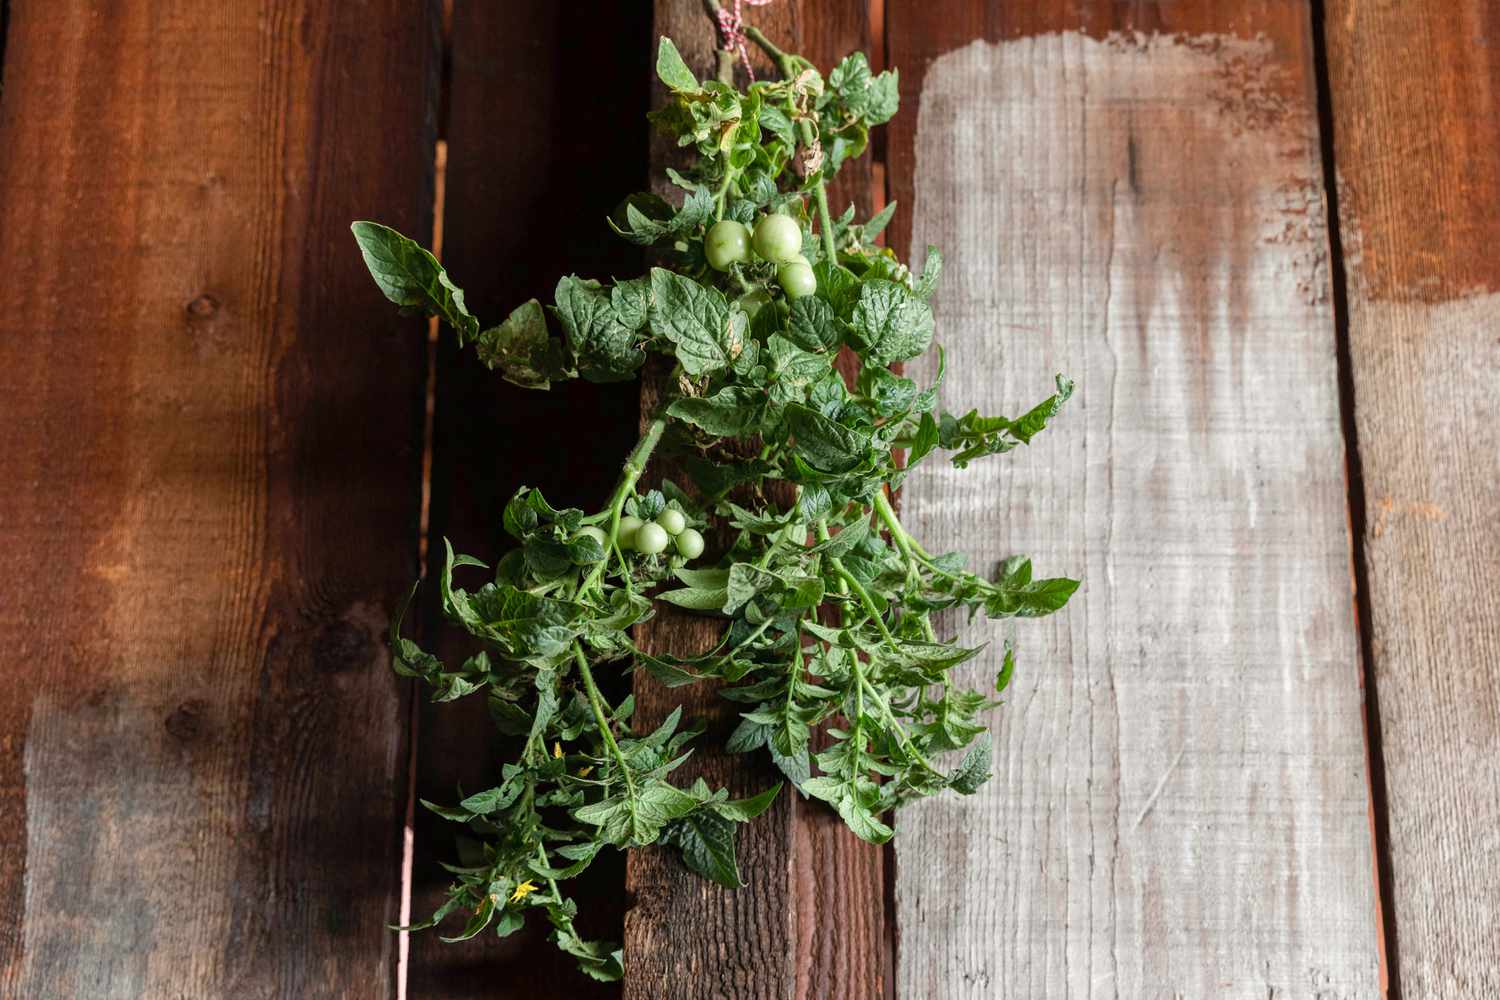 Tomato plant lifted and placed on wooden surface